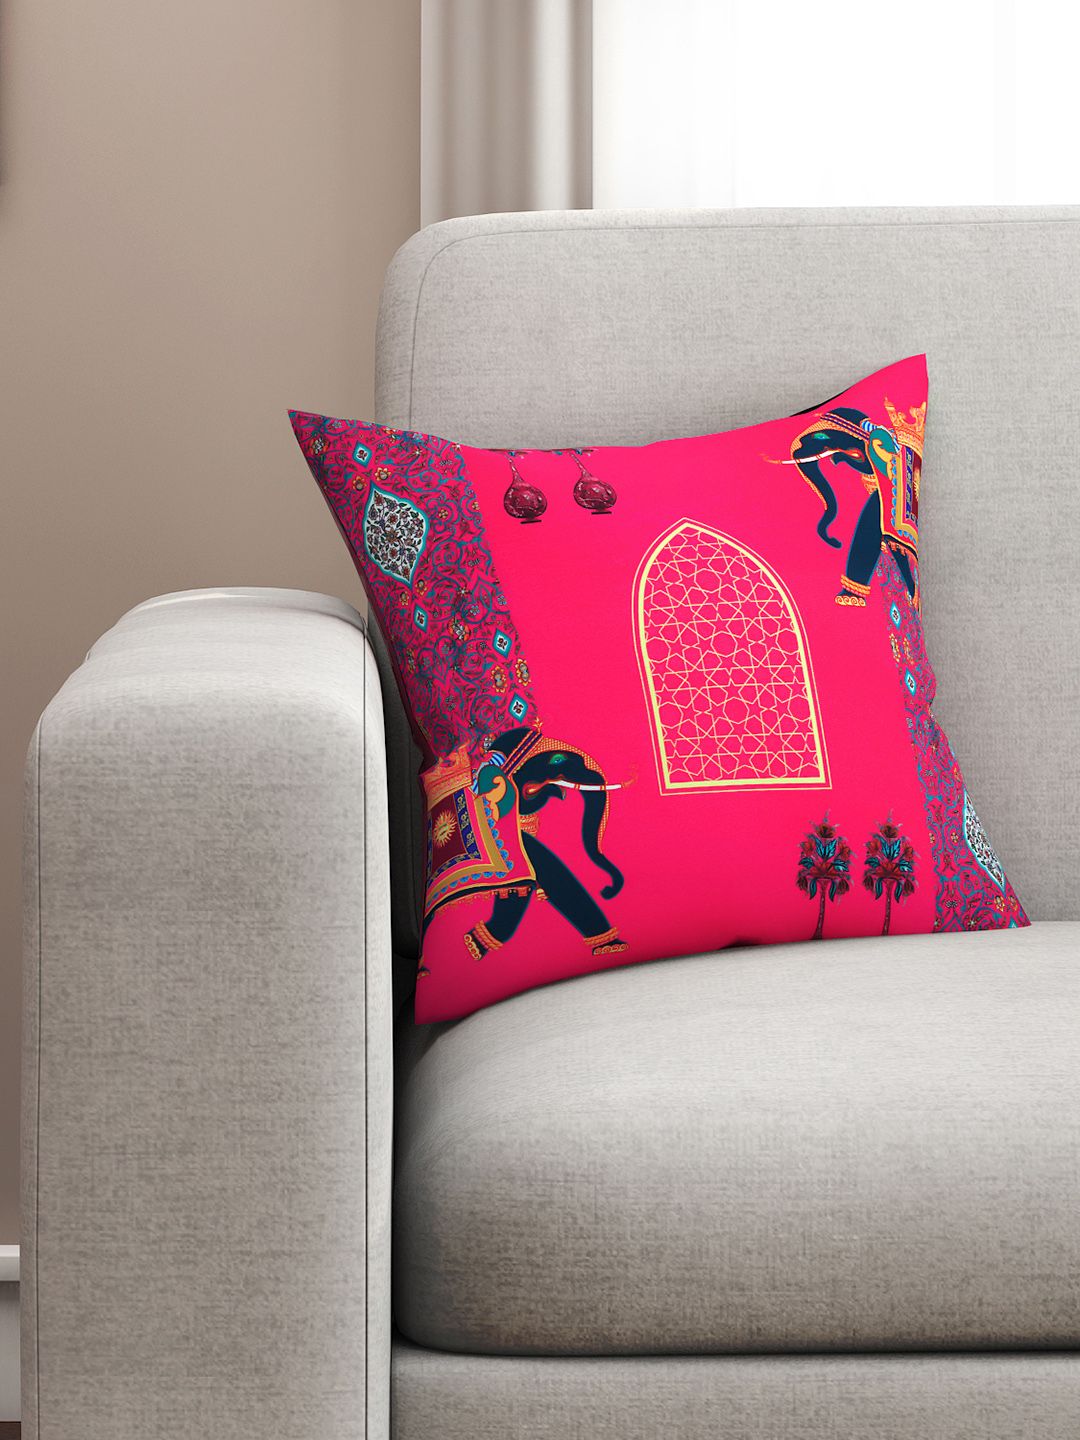 SEJ by Nisha Gupta Red Set of Single Ethnic Motifs Square Cushion Covers Price in India